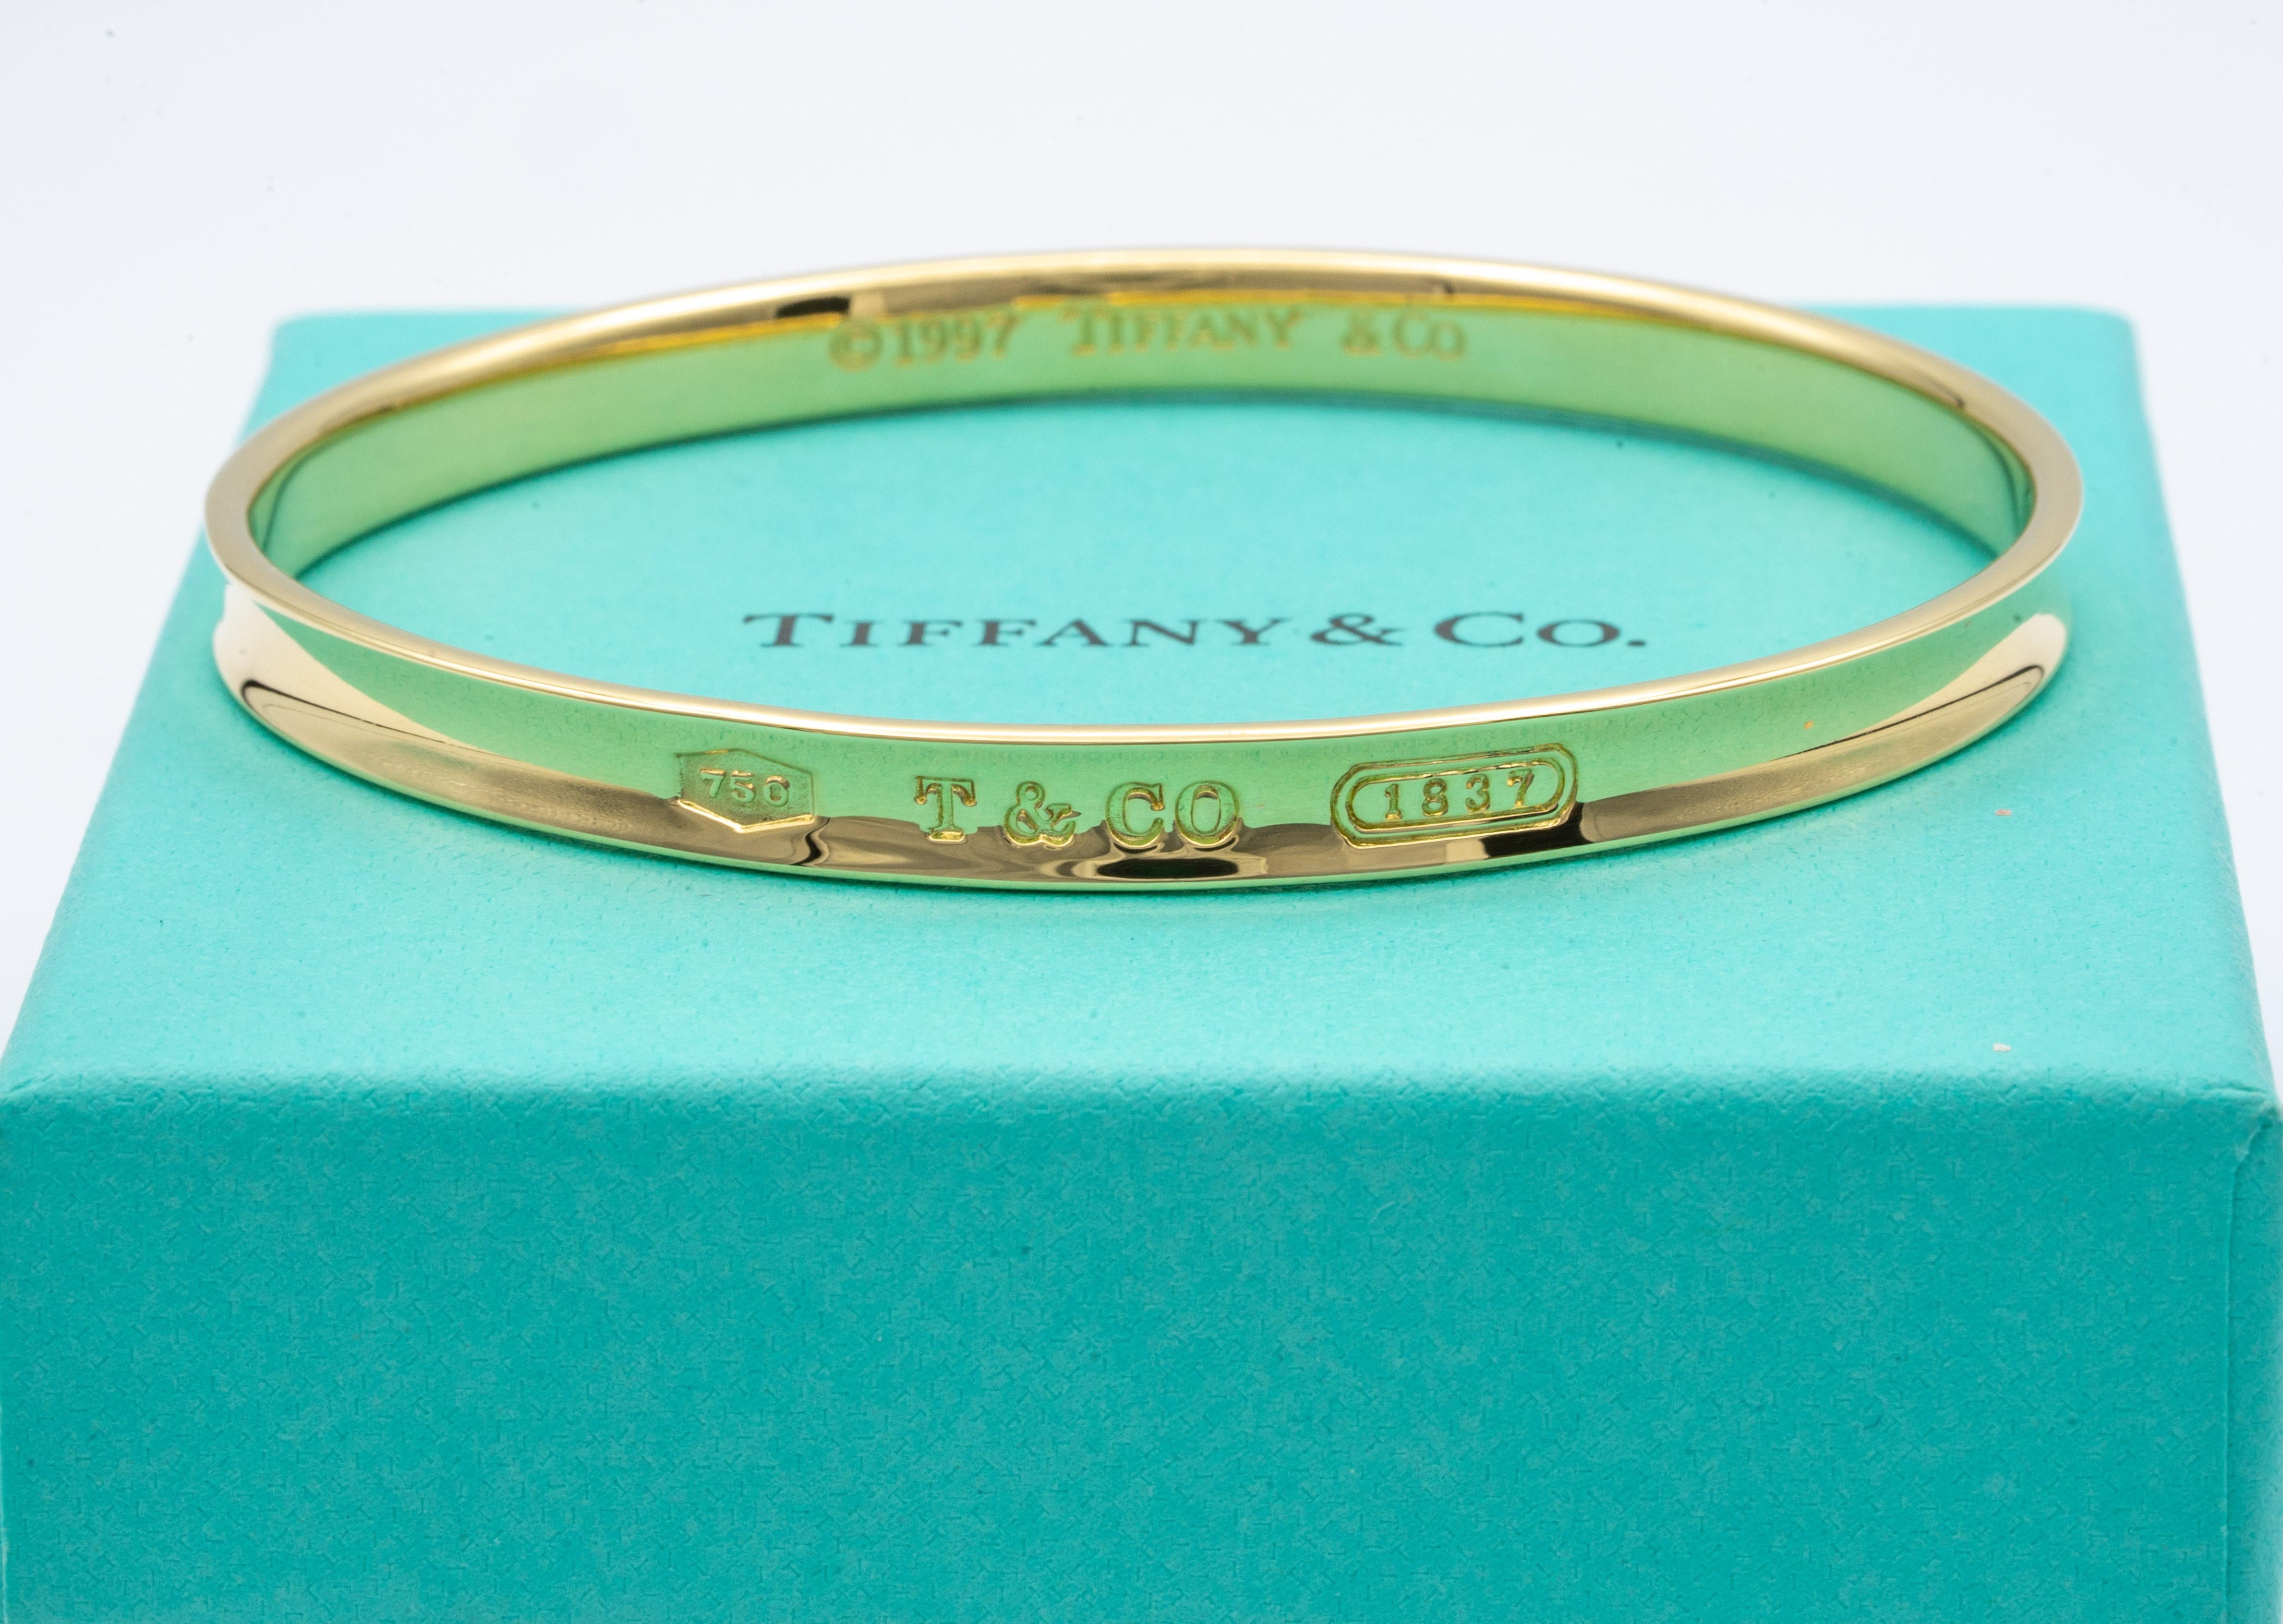 Tiffany & Co. slip on bangle bracelet finely crafted in 18 karat yellow gold. Pertaining to the Tiffany & Co. 